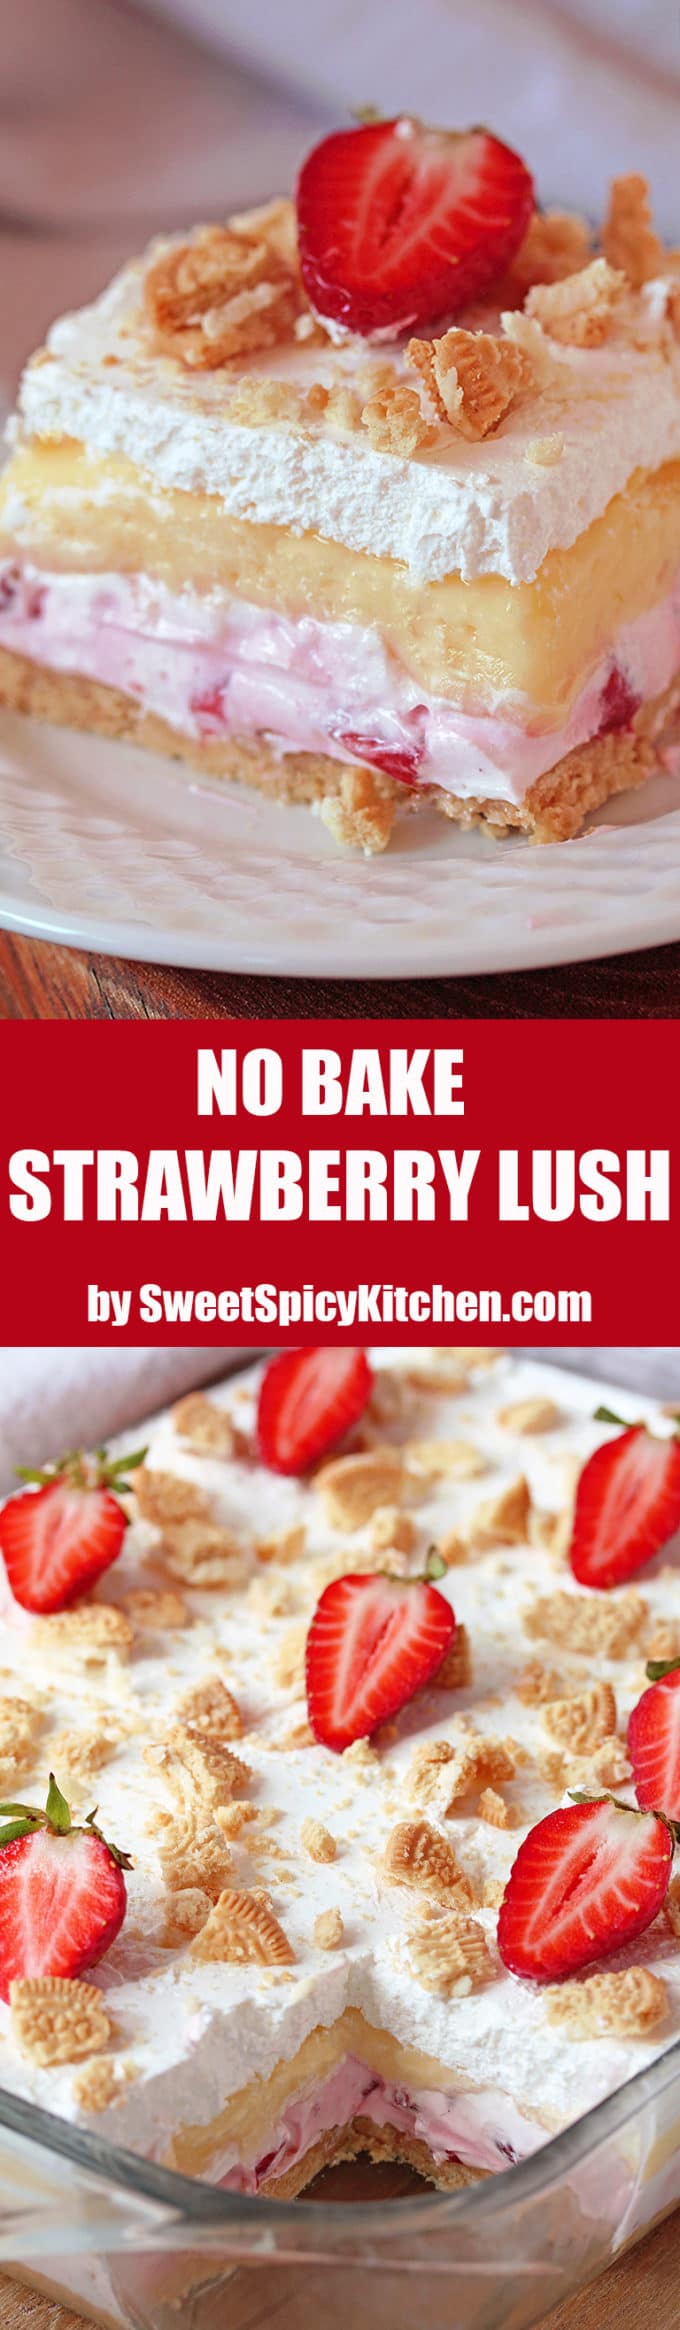 No Bake Strawberry Lush is a layered dessert with golden Oreo crust and creamy layers of strawberry cheesecake and vanilla pudding, topped with whipped cream, crushed golden Oreos and strawberries